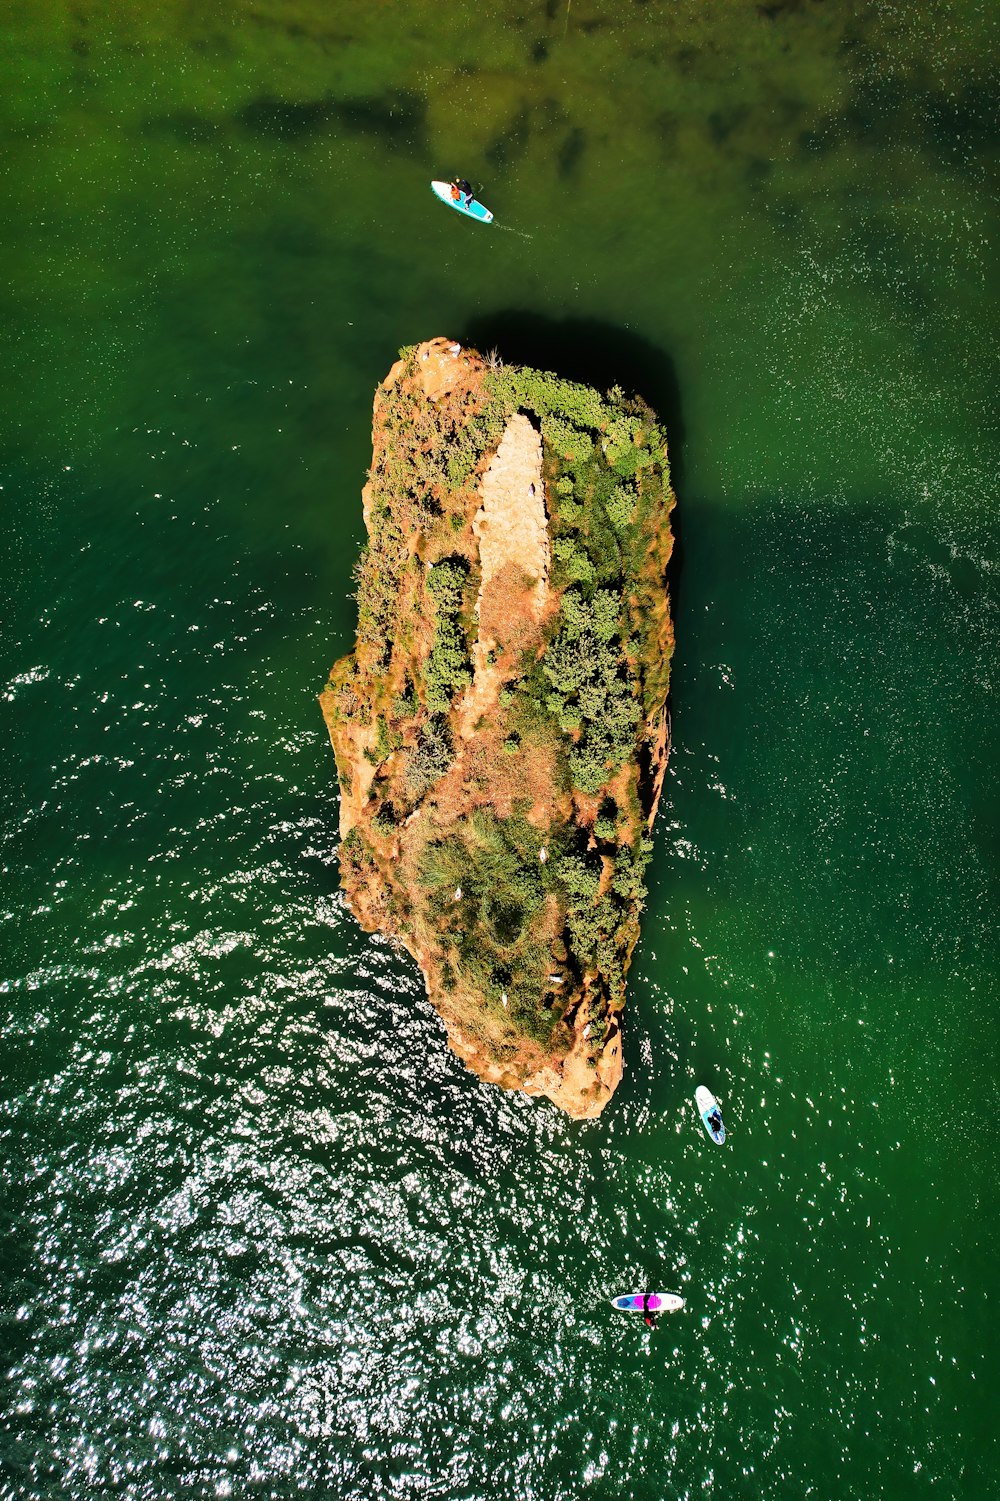 a large rock sticking out of the water